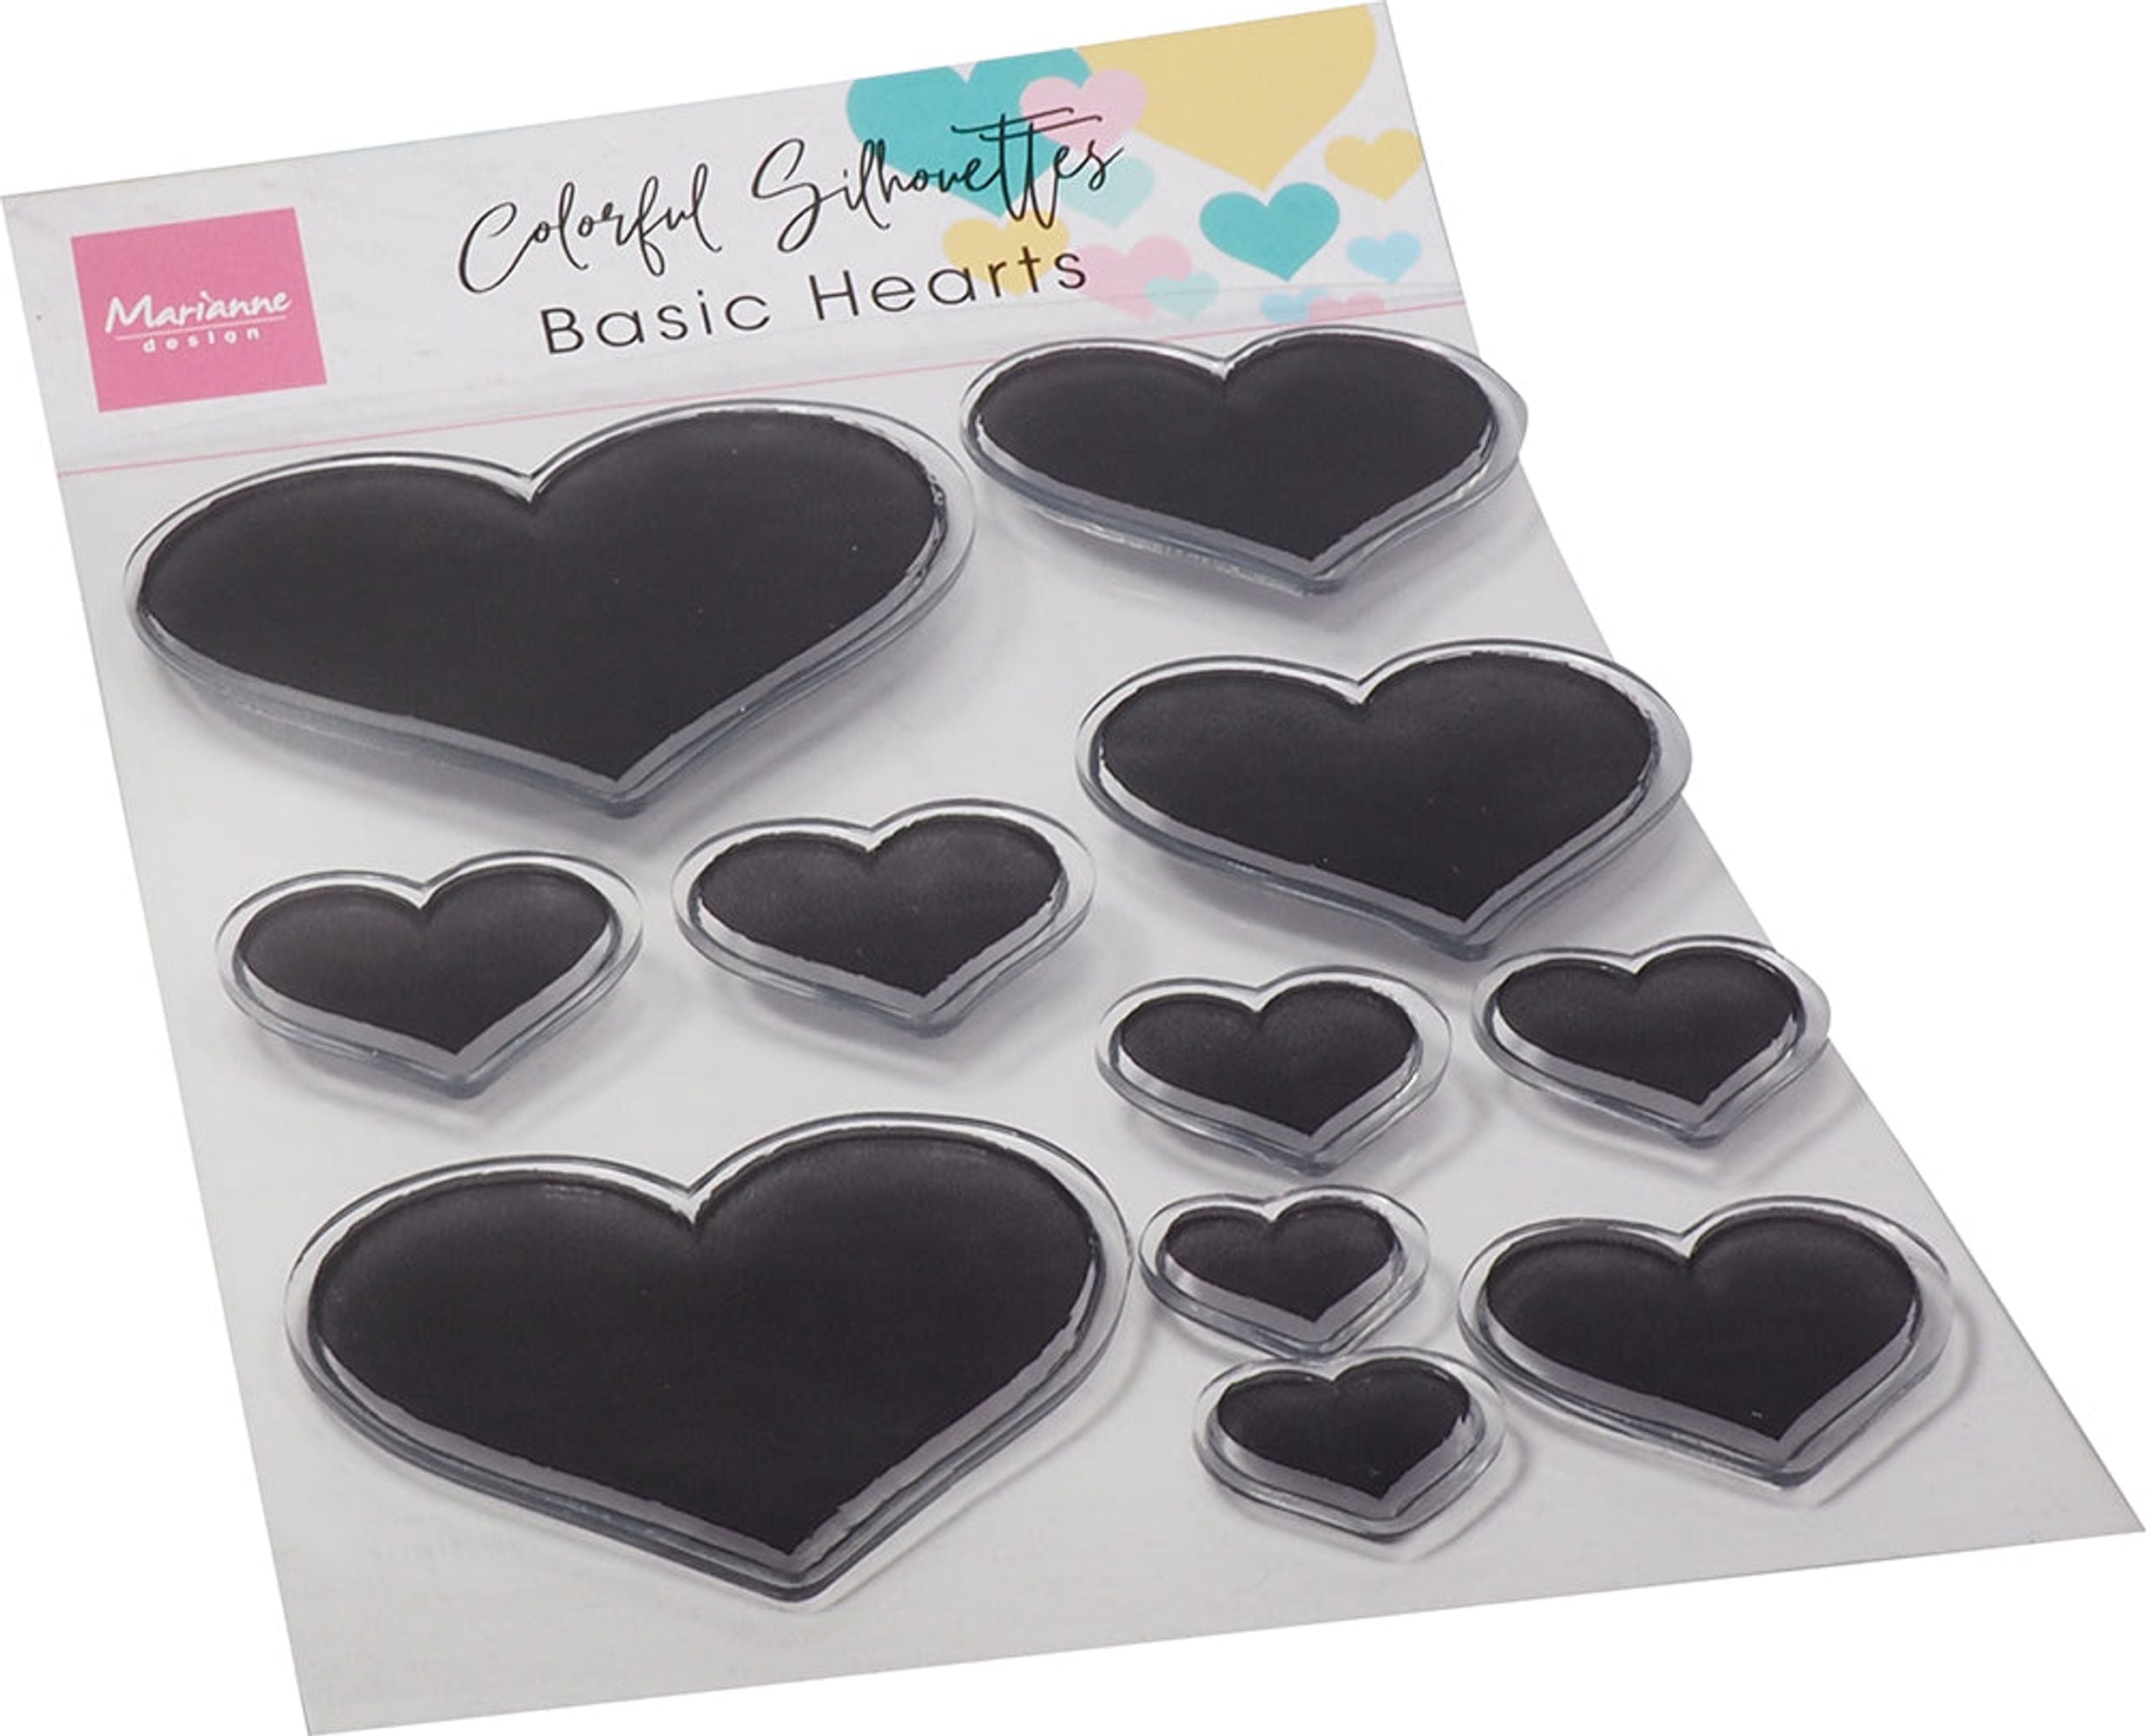 Marianne Design Clear Stamps - Colorful Silhouette - Basic Hearts